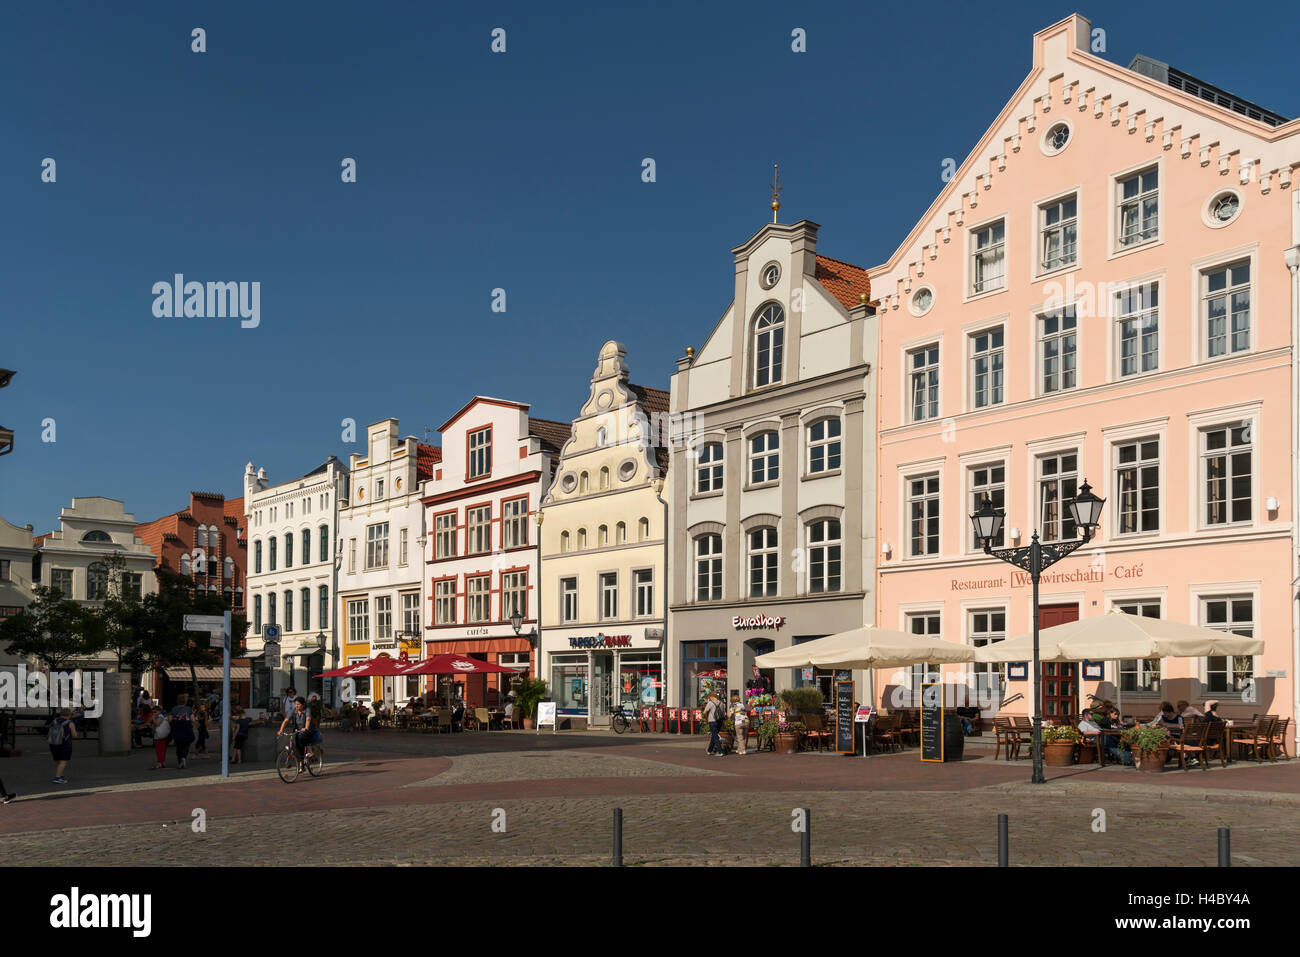 restored facades of the historic old town, Hanseatic City of Wismar, Mecklenburg-Vorpommern, Germany Stock Photo